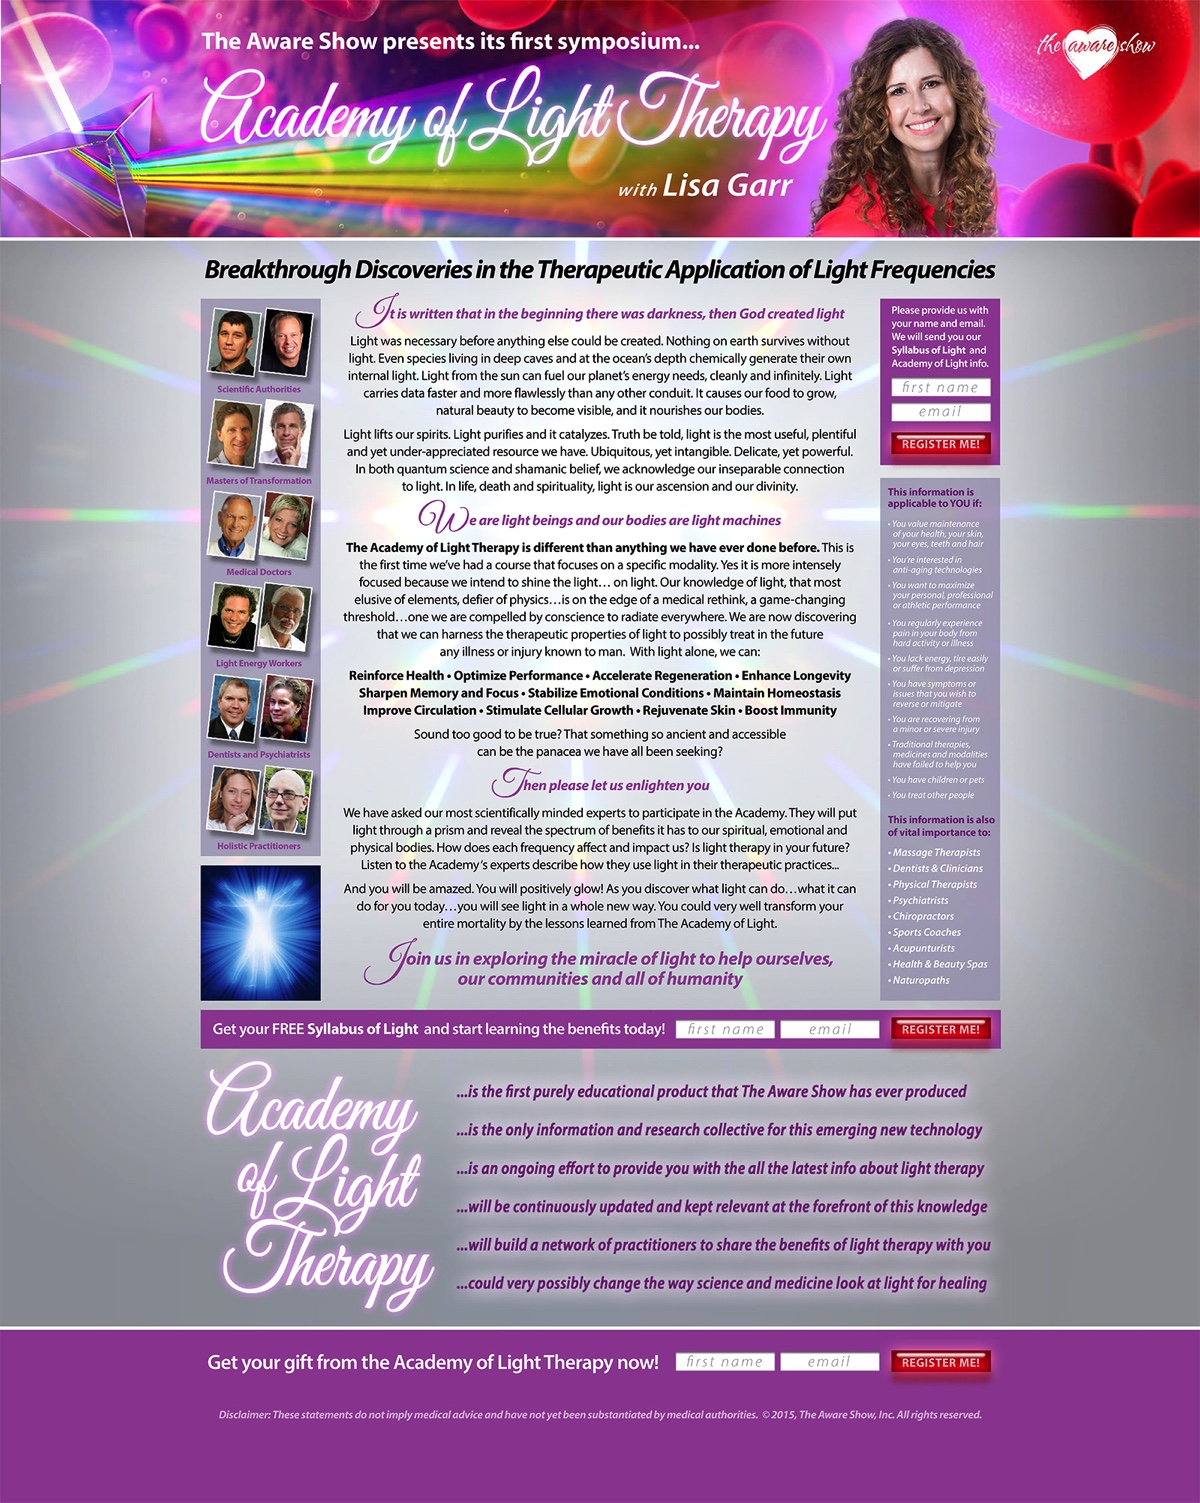 The Aware Show Academy of Light Therapy